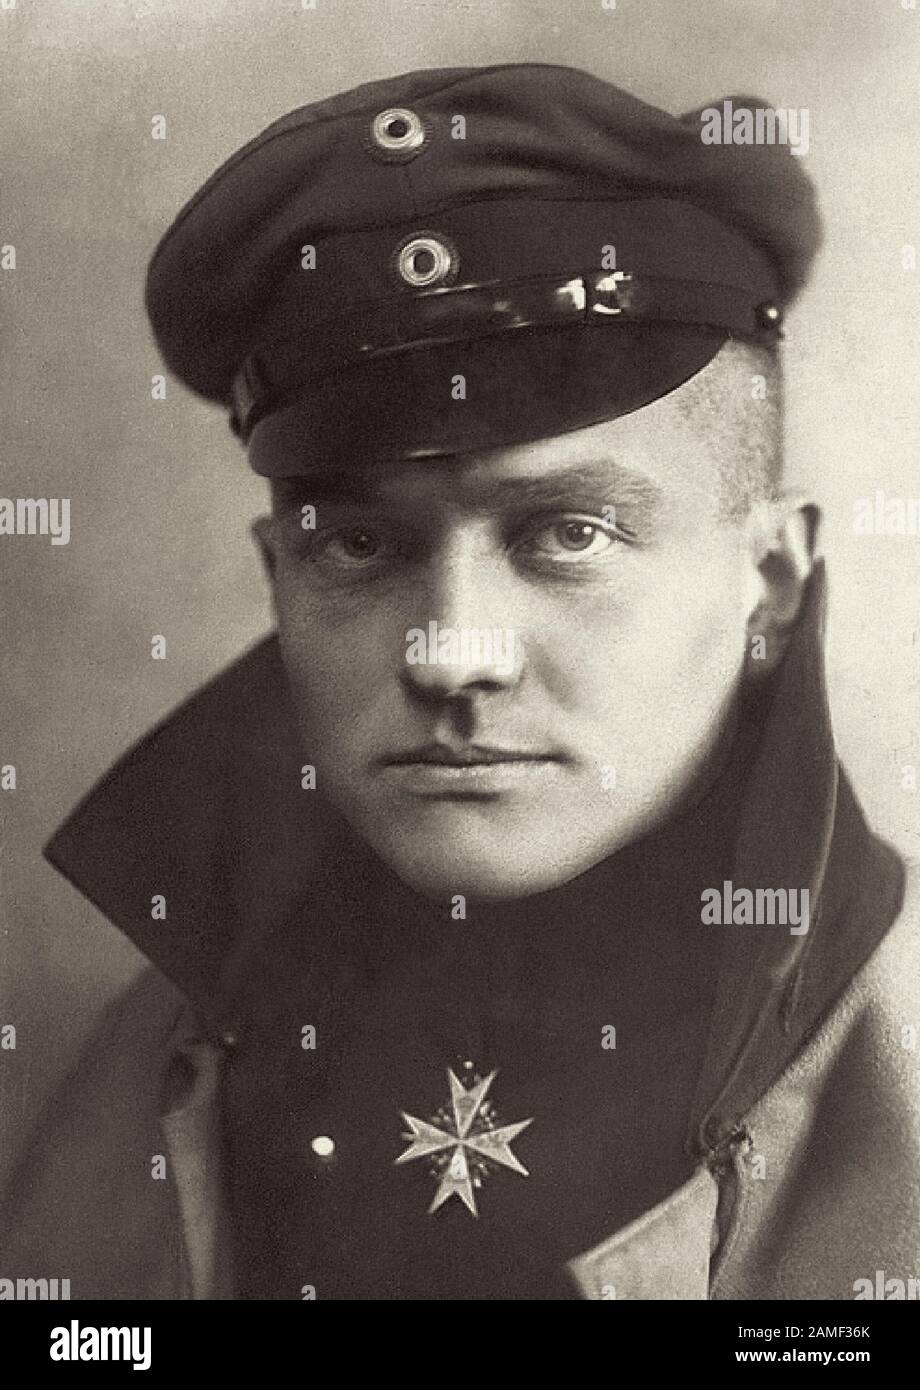 Manfred Albrecht Freiherr von Richthofen (1892 – 1918), also known as the "Red Baron", was a fighter pilot with the German Air Force during World War Stock Photo